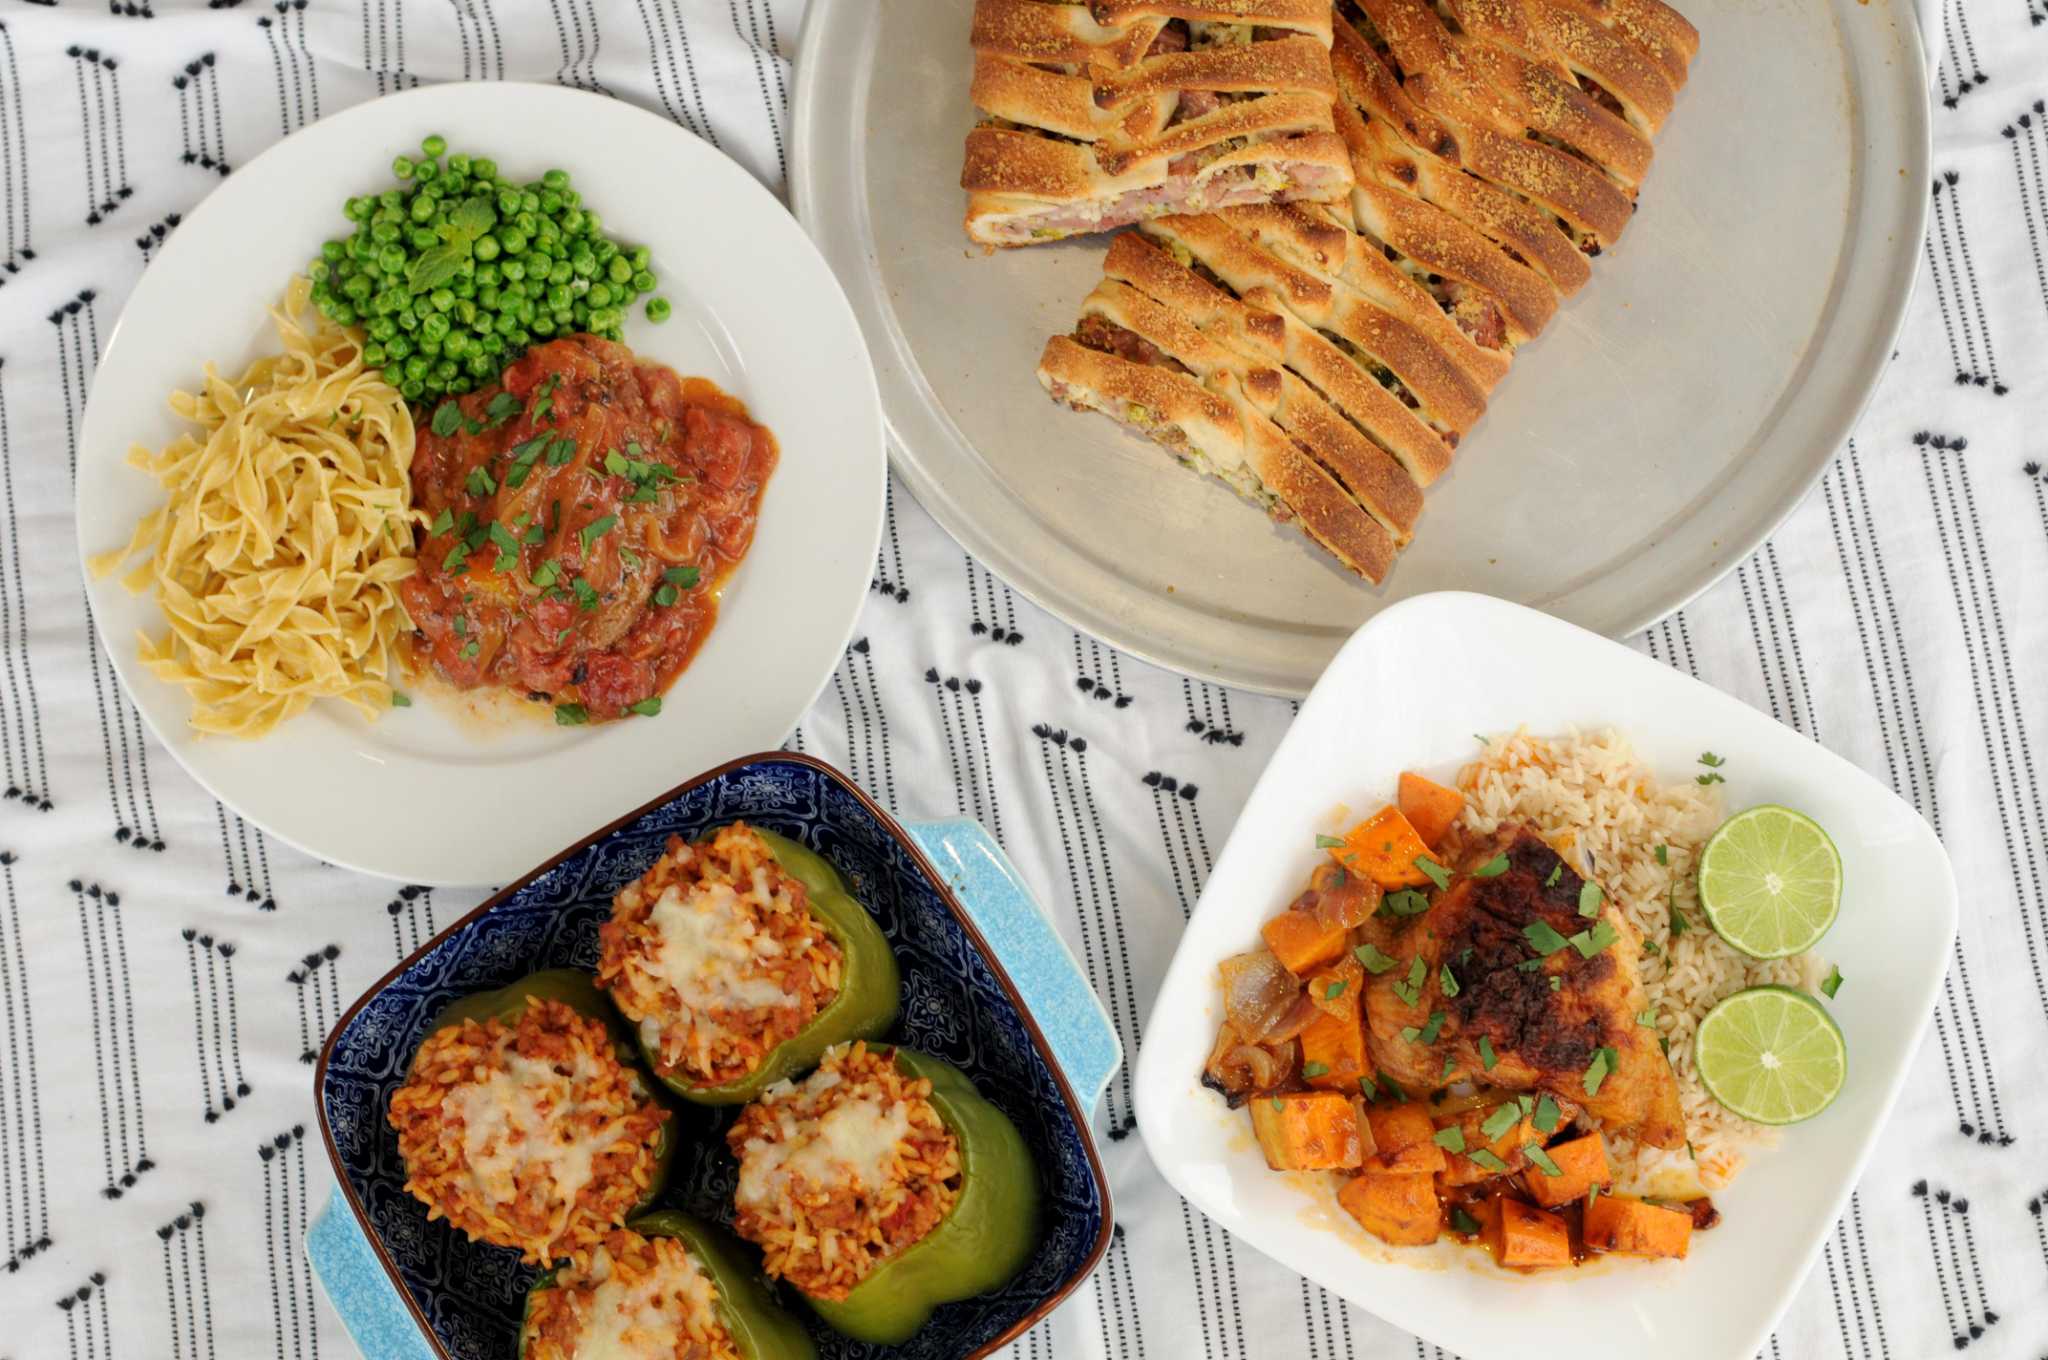 4 complete, family-friendly meals for 4, each for less than $15 total